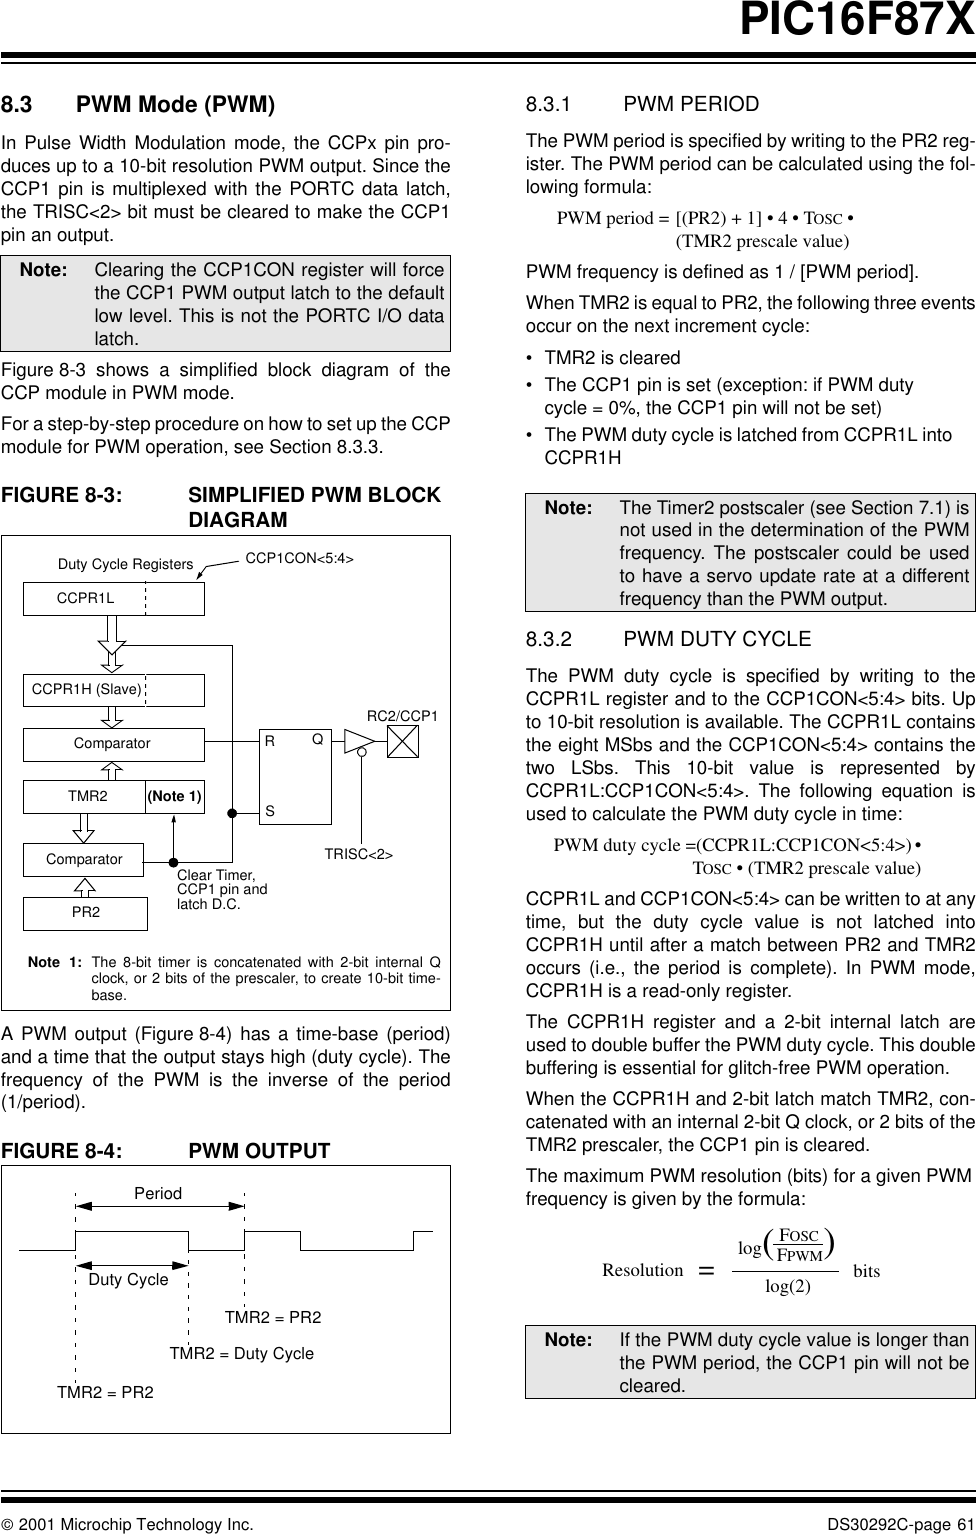  2001 Microchip Technology Inc. DS30292C-page 61PIC16F87X8.3 PWM Mode (PWM)In Pulse Width Modulation mode, the CCPx pin pro-duces up to a 10-bit resolution PWM output. Since theCCP1 pin is multiplexed with the PORTC data latch,the TRISC&lt;2&gt; bit must be cleared to make the CCP1pin an output.Figure 8-3 shows a simplified block diagram of theCCP module in PWM mode.For a step-by-step procedure on how to set up the CCPmodule for PWM operation, see Section 8.3.3.FIGURE 8-3: SIMPLIFIED PWM BLOCK DIAGRAMA PWM output (Figure 8-4) has a time-base (period)and a time that the output stays high (duty cycle). Thefrequency of the PWM is the inverse of the period(1/period).FIGURE 8-4: PWM OUTPUT8.3.1 PWM PERIODThe PWM period is specified by writing to the PR2 reg-ister. The PWM period can be calculated using the fol-lowing formula:      PWM period = [(PR2) + 1] • 4 • TOSC •(TMR2 prescale value)PWM frequency is defined as 1 / [PWM period].When TMR2 is equal to PR2, the following three eventsoccur on the next increment cycle:•TMR2 is cleared•The CCP1 pin is set (exception: if PWM duty cycle = 0%, the CCP1 pin will not be set)•The PWM duty cycle is latched from CCPR1L into CCPR1H8.3.2 PWM DUTY CYCLEThe PWM duty cycle is specified by writing to theCCPR1L register and to the CCP1CON&lt;5:4&gt; bits. Upto 10-bit resolution is available. The CCPR1L containsthe eight MSbs and the CCP1CON&lt;5:4&gt; contains thetwo LSbs. This 10-bit value is represented byCCPR1L:CCP1CON&lt;5:4&gt;. The following equation isused to calculate the PWM duty cycle in time:      PWM duty cycle =(CCPR1L:CCP1CON&lt;5:4&gt;) •                 TOSC • (TMR2 prescale value)CCPR1L and CCP1CON&lt;5:4&gt; can be written to at anytime, but the duty cycle value is not latched intoCCPR1H until after a match between PR2 and TMR2occurs (i.e., the period is complete). In PWM mode,CCPR1H is a read-only register.The CCPR1H register and a 2-bit internal latch areused to double buffer the PWM duty cycle. This doublebuffering is essential for glitch-free PWM operation.When the CCPR1H and 2-bit latch match TMR2, con-catenated with an internal 2-bit Q clock, or 2 bits of theTMR2 prescaler, the CCP1 pin is cleared.The maximum PWM resolution (bits) for a given PWMfrequency is given by the formula:Note: Clearing the CCP1CON register will forcethe CCP1 PWM output latch to the defaultlow level. This is not the PORTC I/O datalatch.CCPR1LCCPR1H (Slave)ComparatorTMR2ComparatorPR2(Note 1)RQSDuty Cycle Registers CCP1CON&lt;5:4&gt;Clear Timer,CCP1 pin and latch D.C.TRISC&lt;2&gt;RC2/CCP1Note 1: The 8-bit timer is concatenated with 2-bit internal Qclock, or 2 bits of the prescaler, to create 10-bit time-base.PeriodDuty CycleTMR2 = PR2TMR2 = Duty CycleTMR2 = PR2Note: The Timer2 postscaler (see Section 7.1) isnot used in the determination of the PWMfrequency. The postscaler could be usedto have a servo update rate at a differentfrequency than the PWM output.Note: If the PWM duty cycle value is longer thanthe PWM period, the CCP1 pin will not becleared.log(FPWMlog(2)FOSC )bits=Resolution